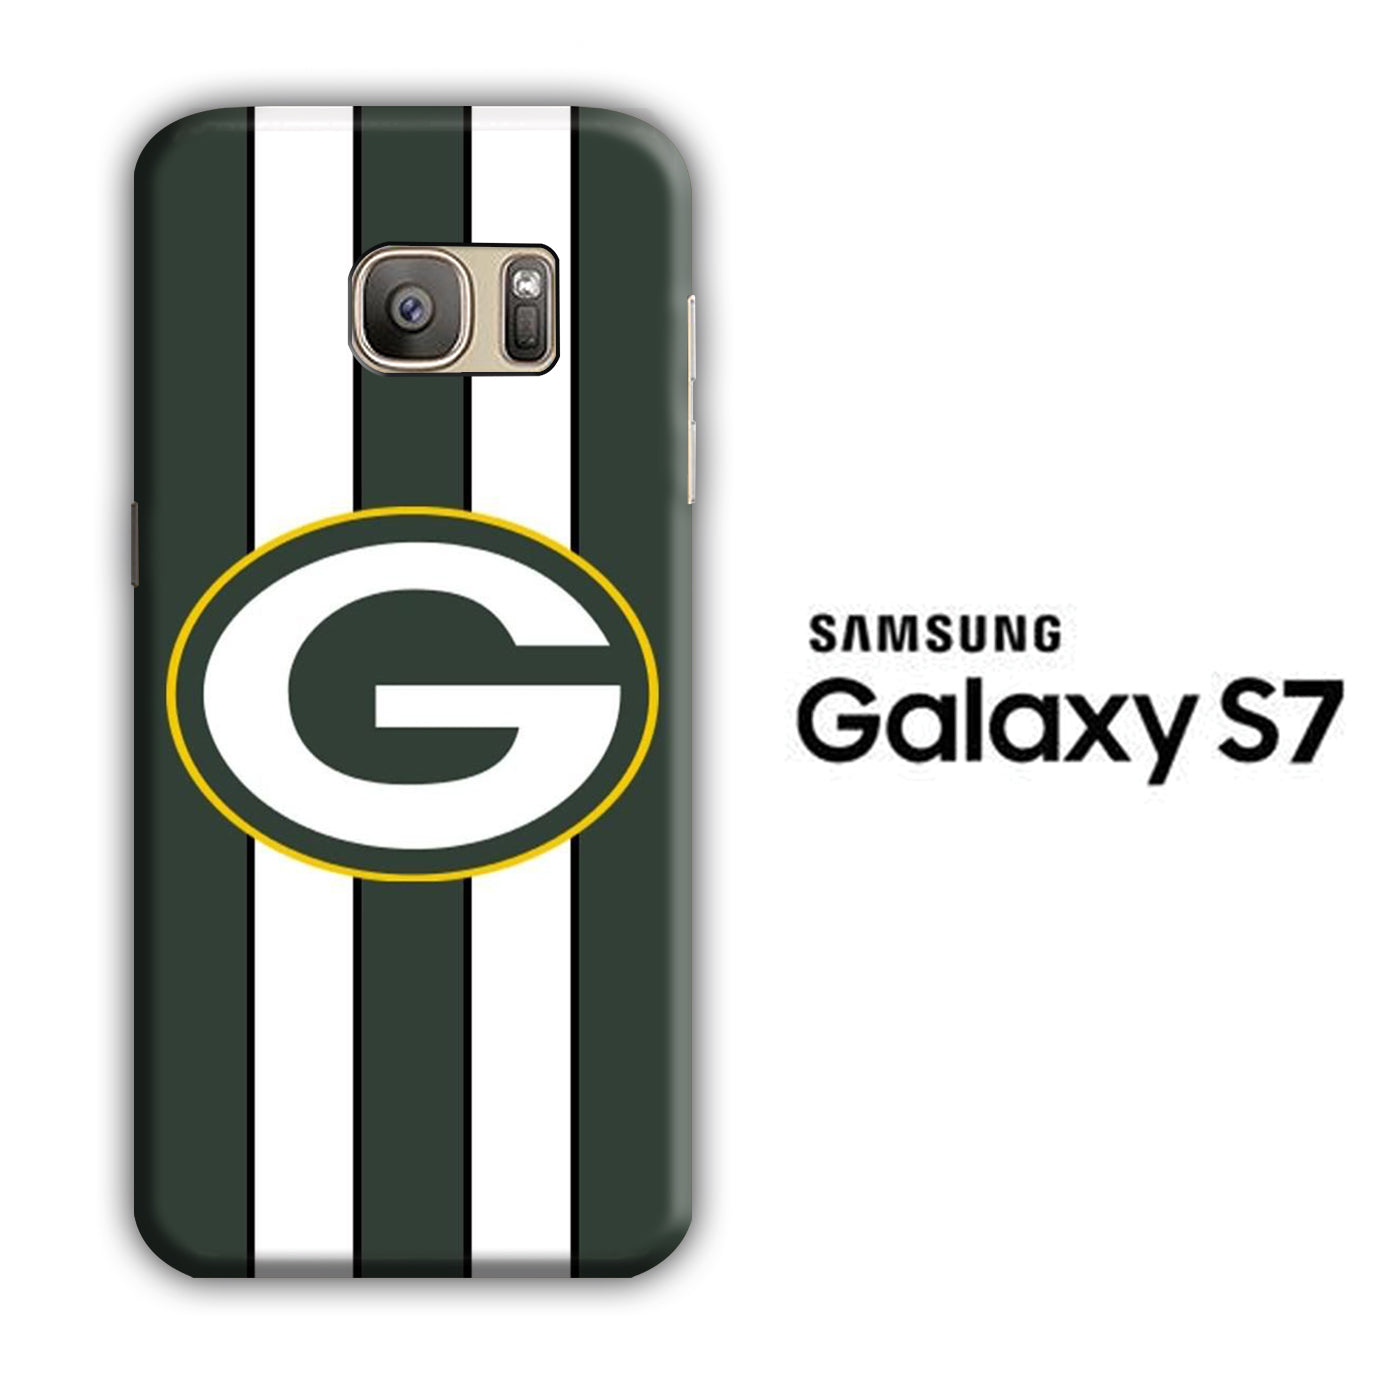 NFL Greenbay Packers 001 Samsung Galaxy S7 3D Case - cleverny